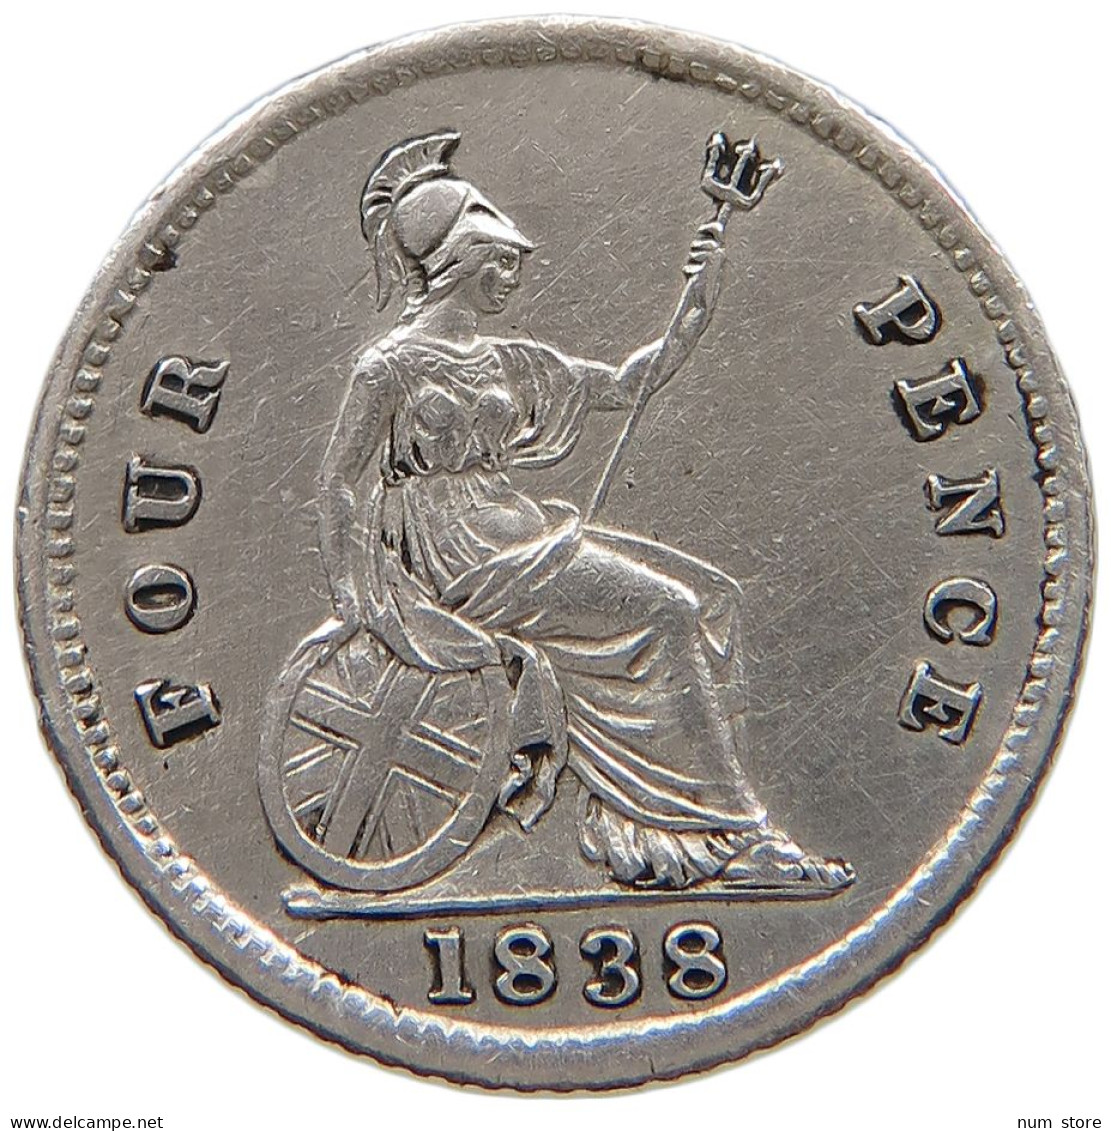 GREAT BRITAIN FOURPENCE 1838 Victoria 1837-1901 #t158 0449 - G. 4 Pence/ Groat